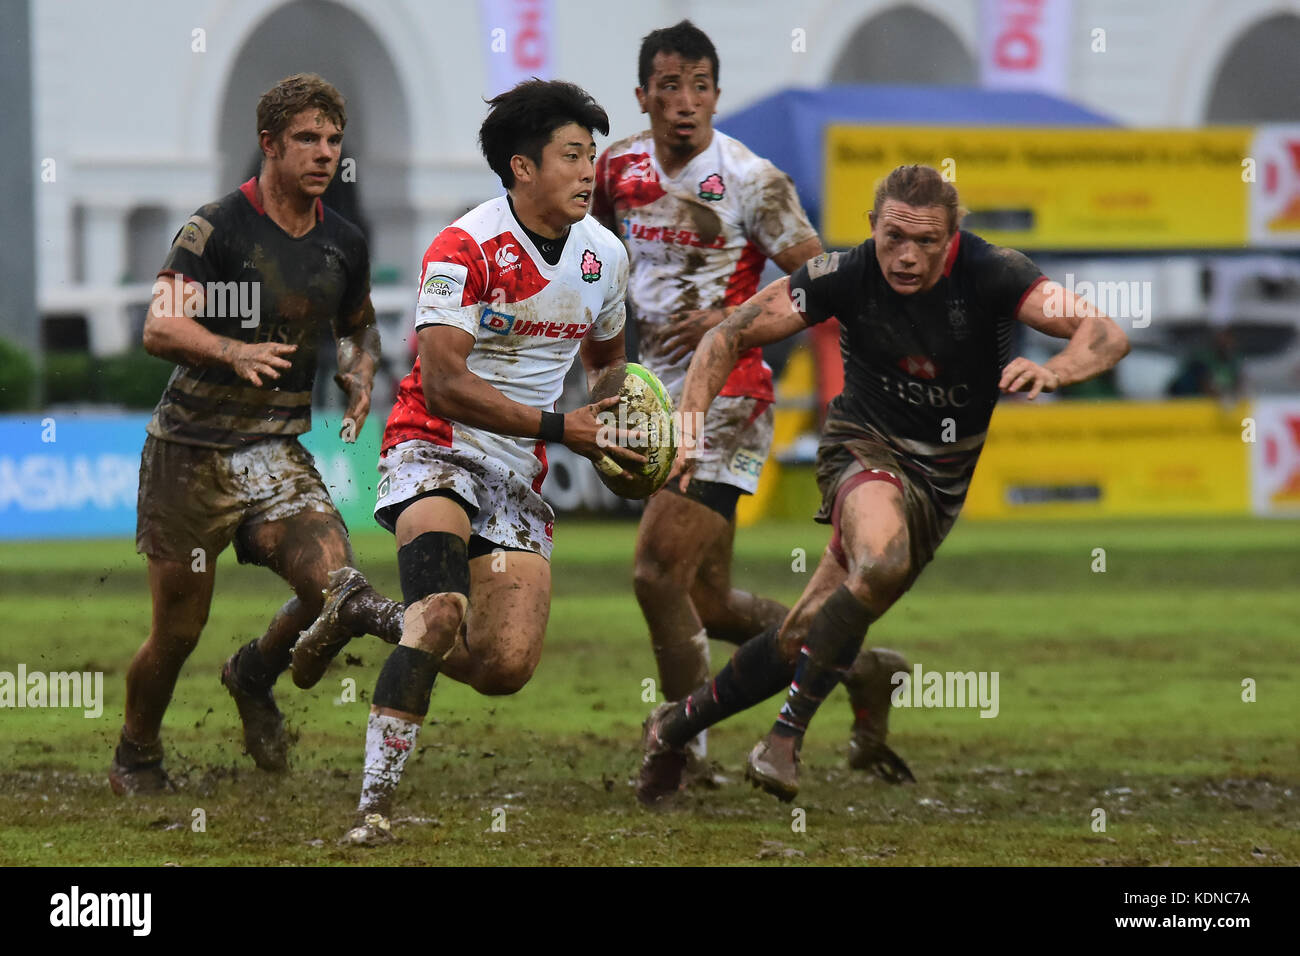 Colombo, Sri Lanka. 14th Oct, 2017. Asia Rugby Sevens 2017 at Race Course Ground on 14 October 2017 in Colombo, Sri Lanka. Credit: Musthaq Thasleem/Pacific Press/Alamy Live News Stock Photo